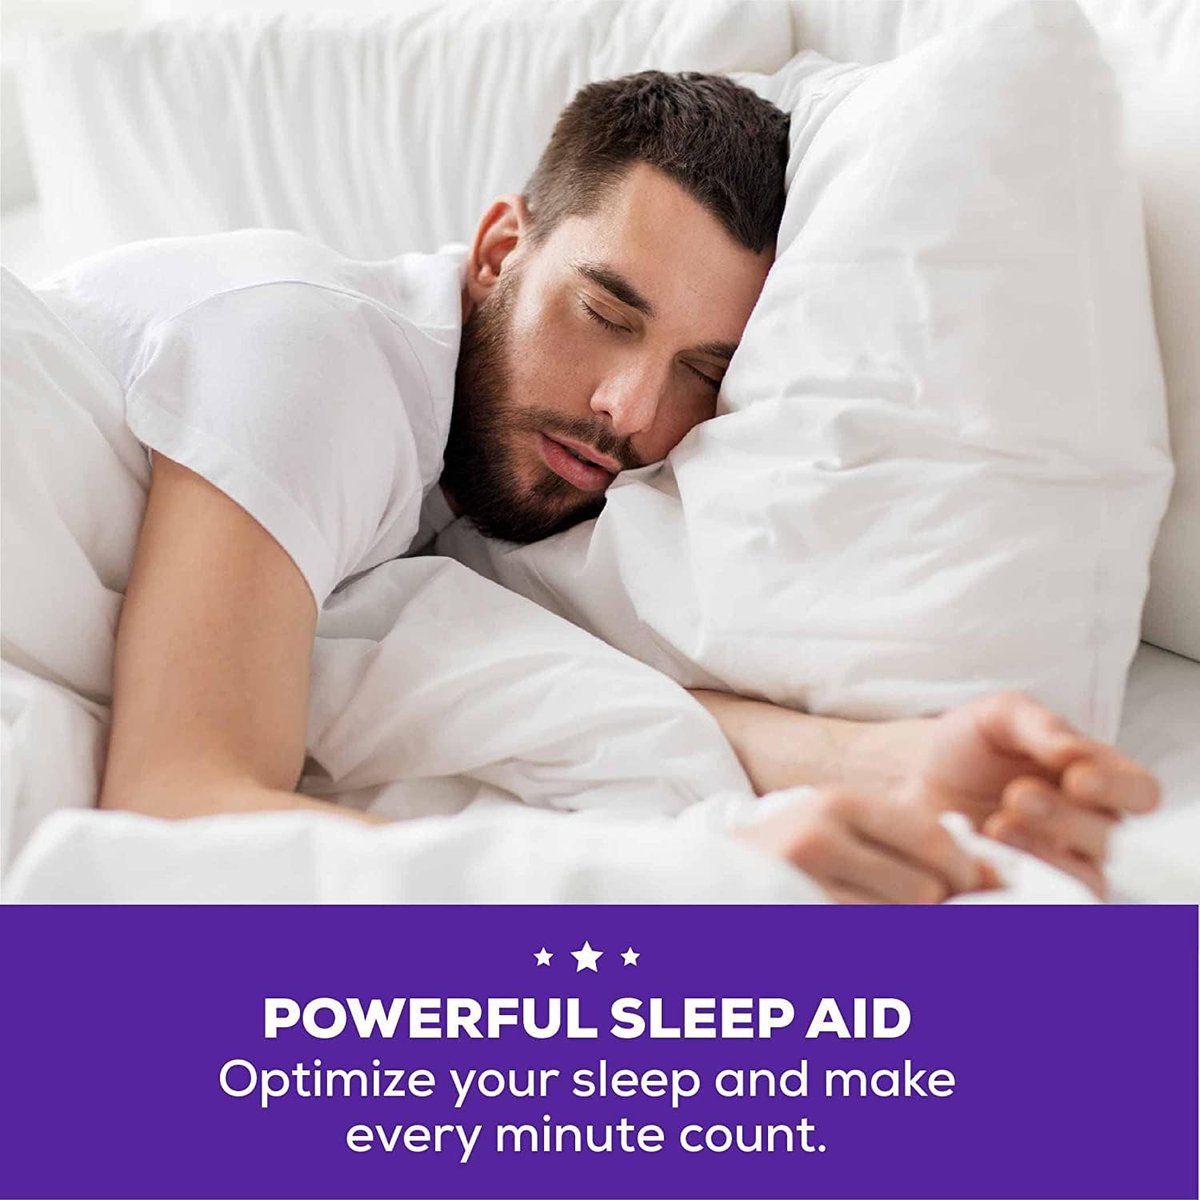 A good night’s sleep is necessary for maintaining physical and mental well-being. 🌙
❤️FOANT Sleep Complex
This sleep supplement is non-habit forming and easy-to-swallow. 
It is your worry-free answer to getting a better night's sleep. 
#sleepaid #FOANT #sleepsupport #supplements